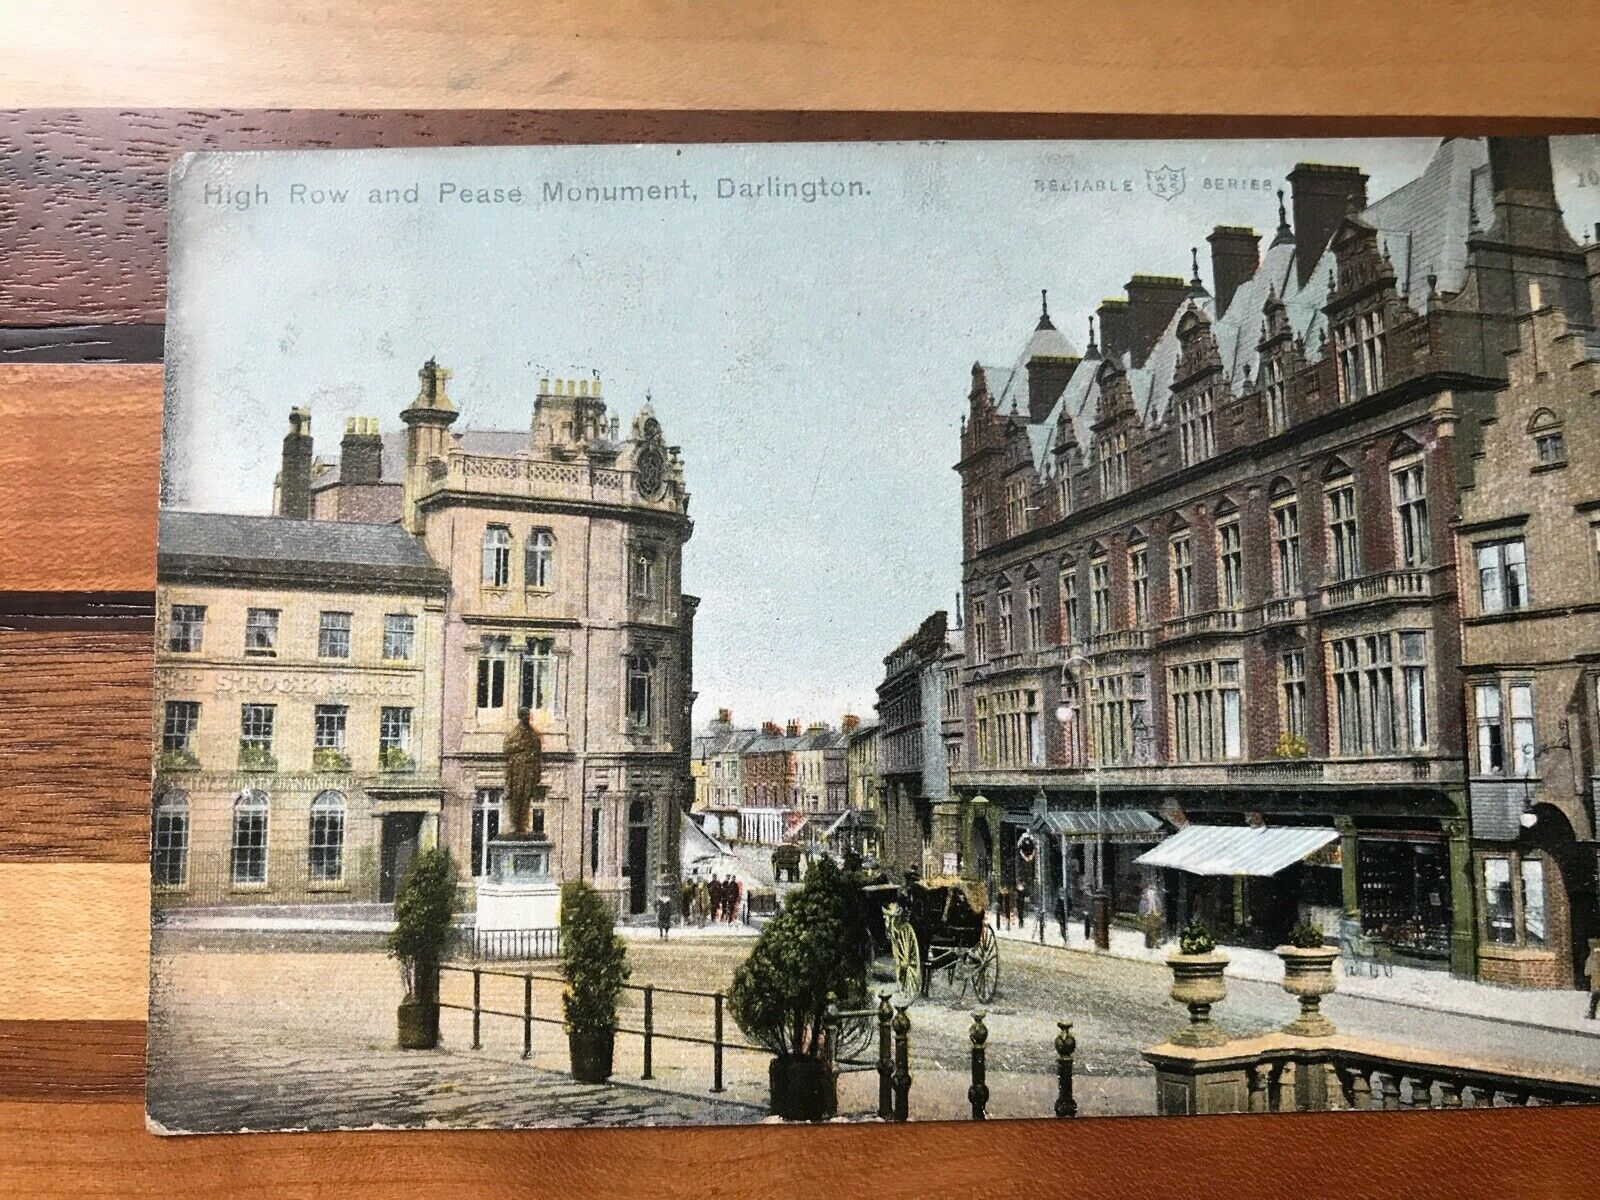 House Clearance - Darlington.  High Row and Pease Monument.  Reliable Series